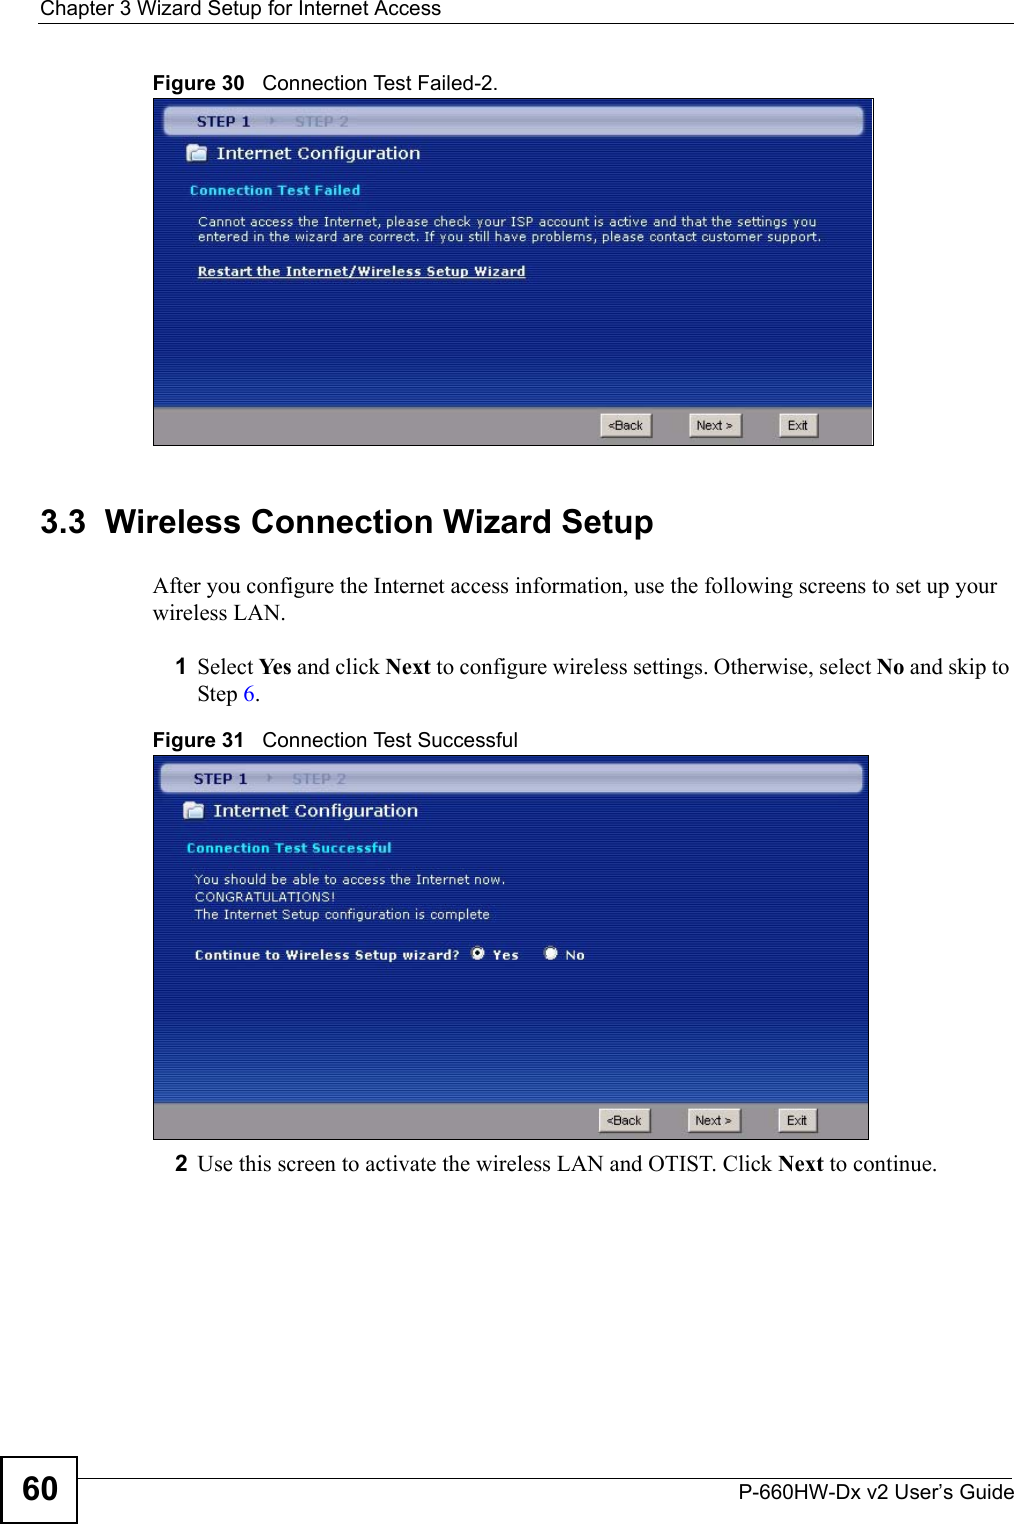 Chapter 3 Wizard Setup for Internet AccessP-660HW-Dx v2 User’s Guide60Figure 30   Connection Test Failed-2.3.3  Wireless Connection Wizard SetupAfter you configure the Internet access information, use the following screens to set up your wireless LAN. 1Select Ye s  and click Next to configure wireless settings. Otherwise, select No and skip to Step 6.Figure 31   Connection Test Successful2Use this screen to activate the wireless LAN and OTIST. Click Next to continue.